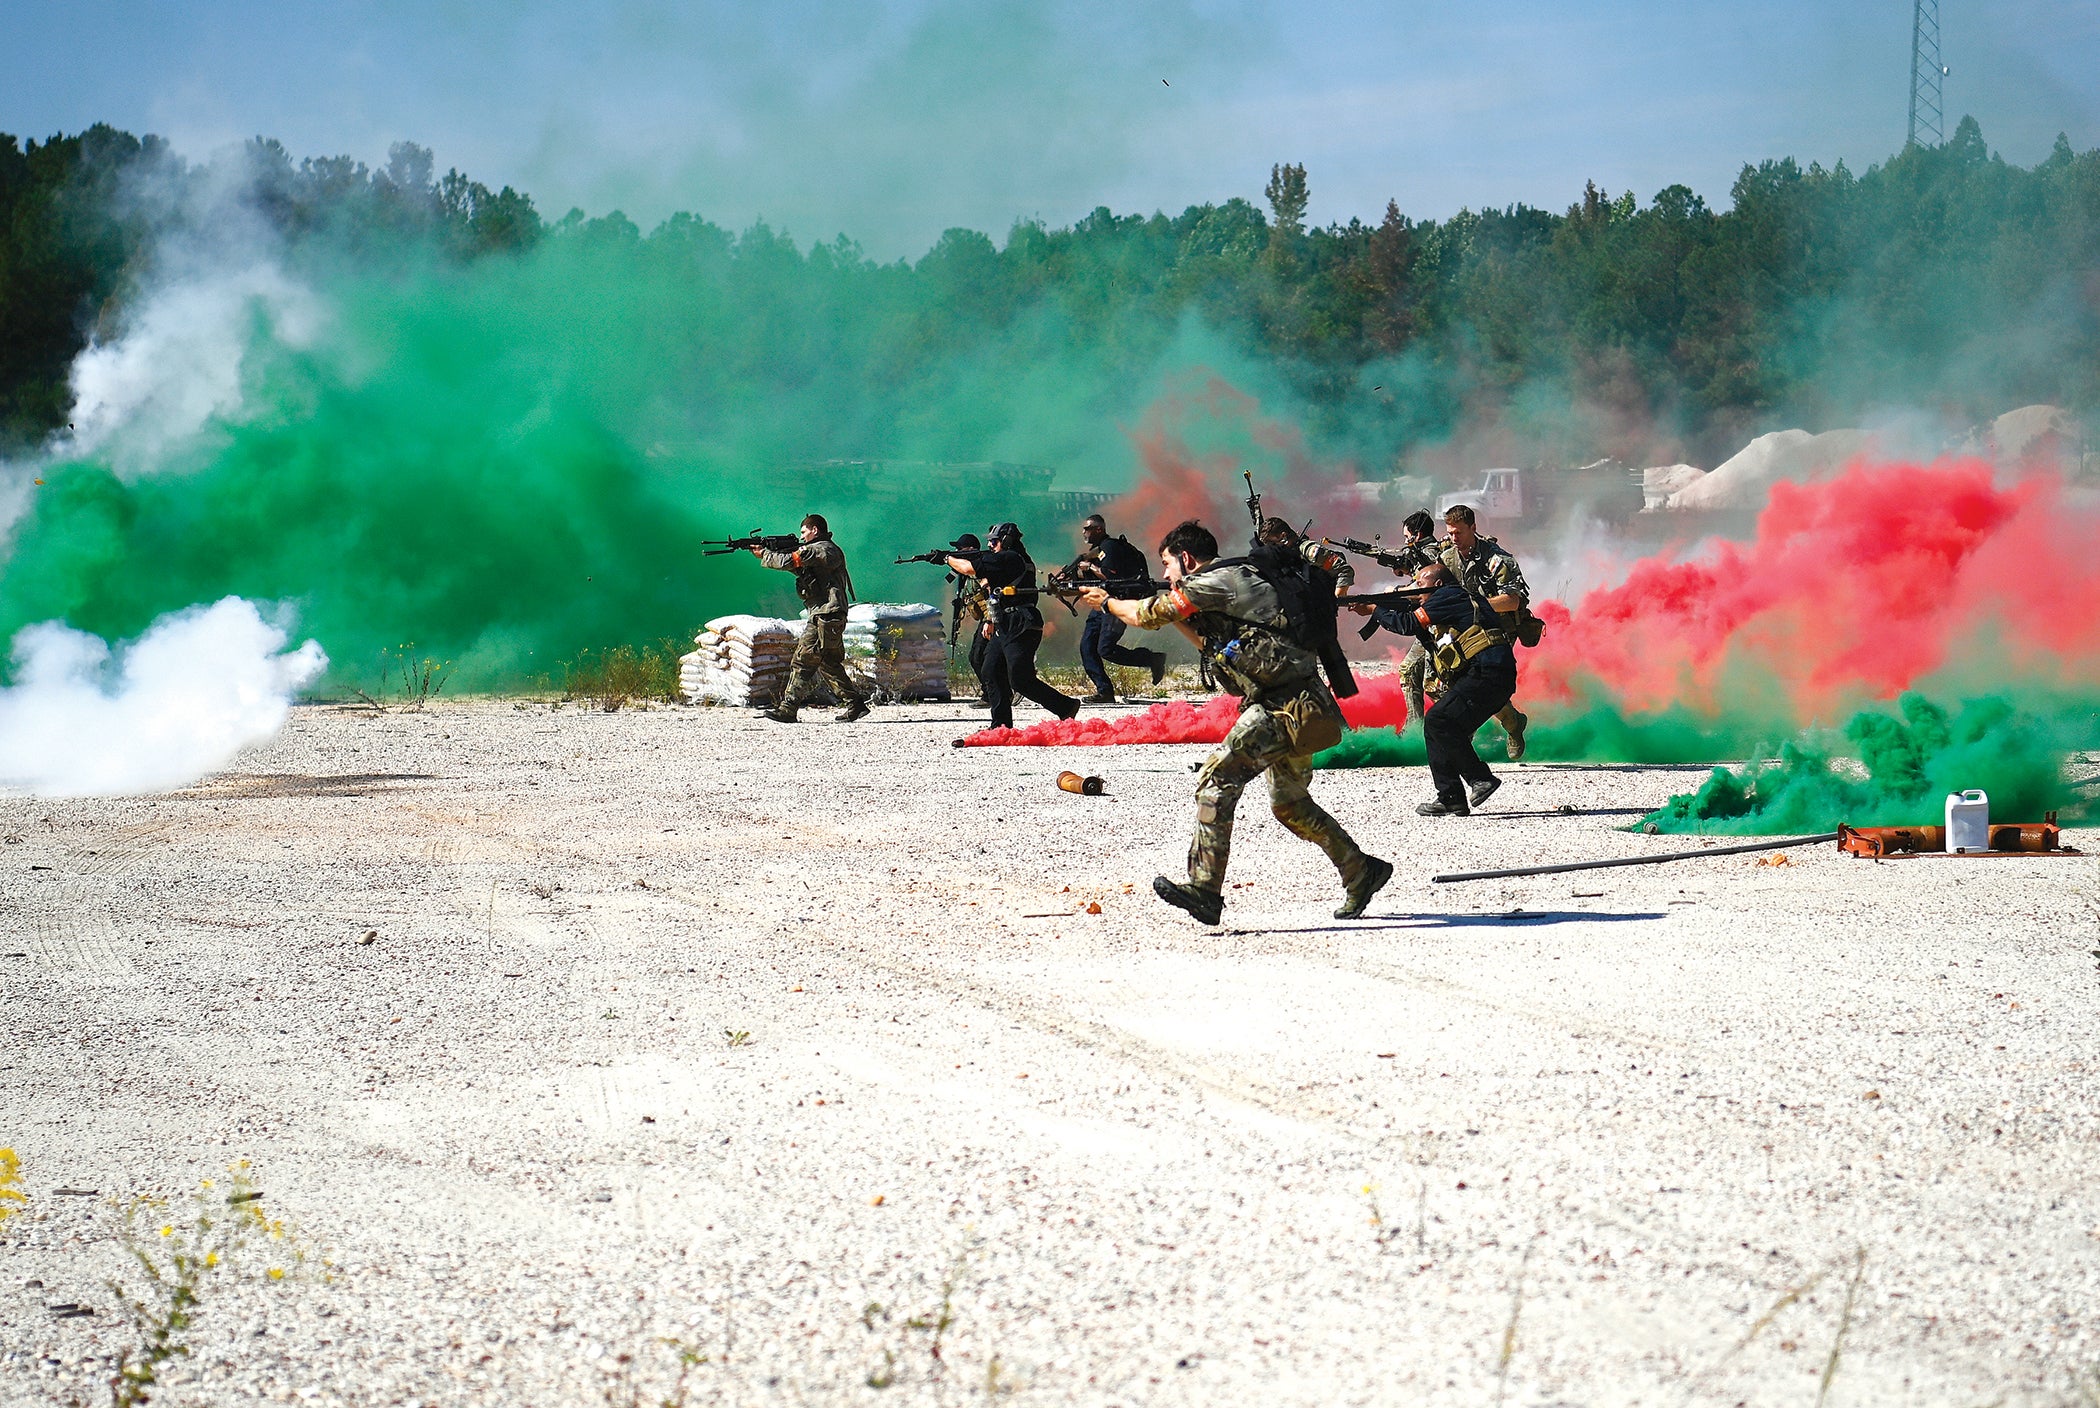 Robin Sage is the culminating exercise for soldiers in the Special Forces Qualification Course. (Credit: U.S. Army/ K. Kassens)